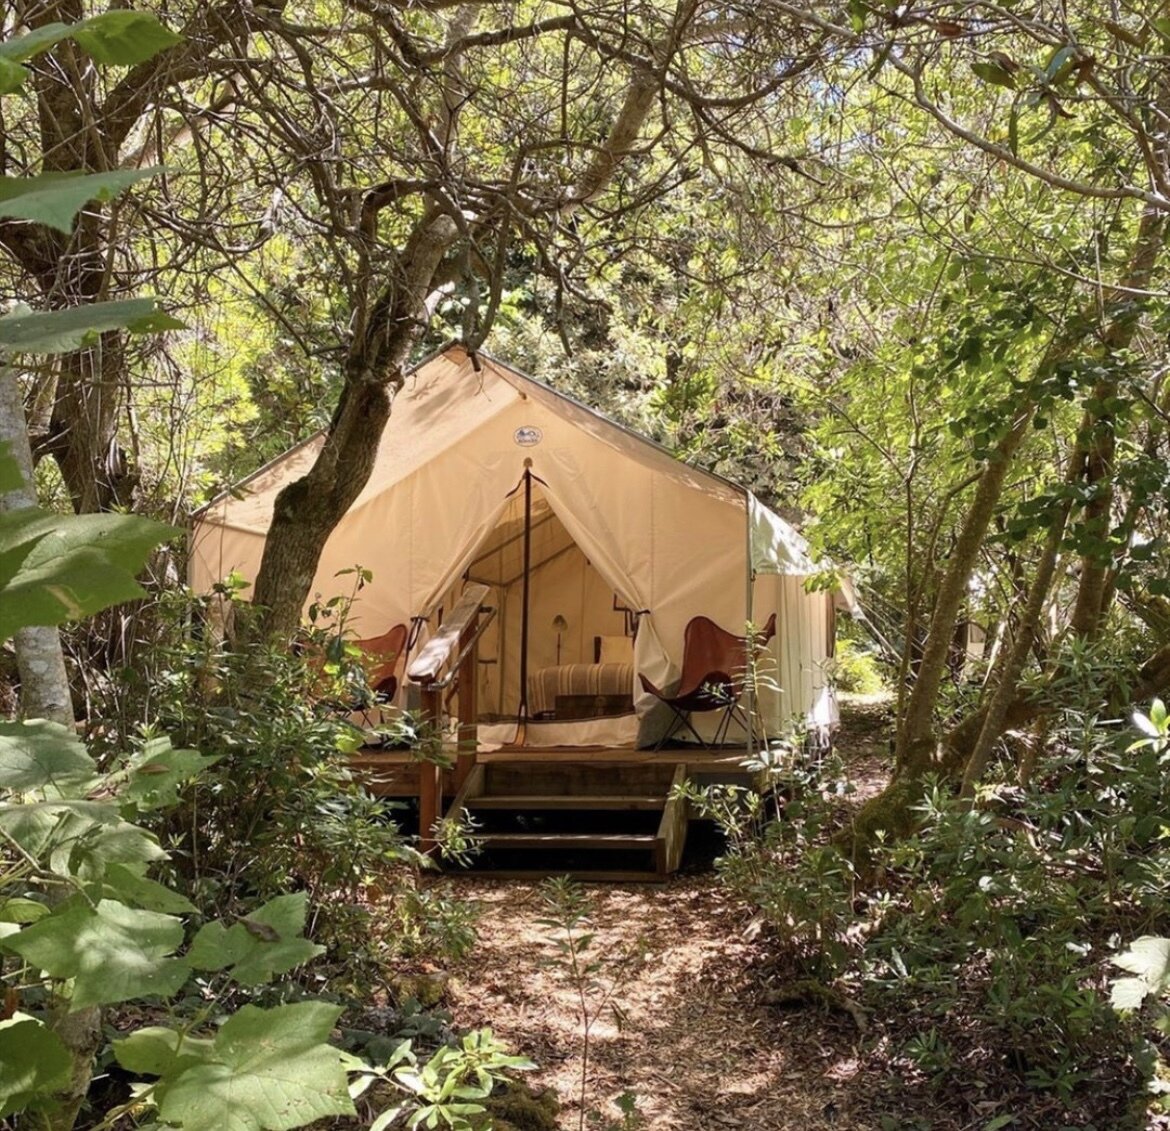 Our season ends soon - book one last stay with us! 🏕️

photo via @unoeth 

#autumn #autumnal #mendocinogrove #autumnleaves #cozyfall #FallTravel #AutumnAdventures #glamping #travelinfall #autumnescapes #mendocinogrove